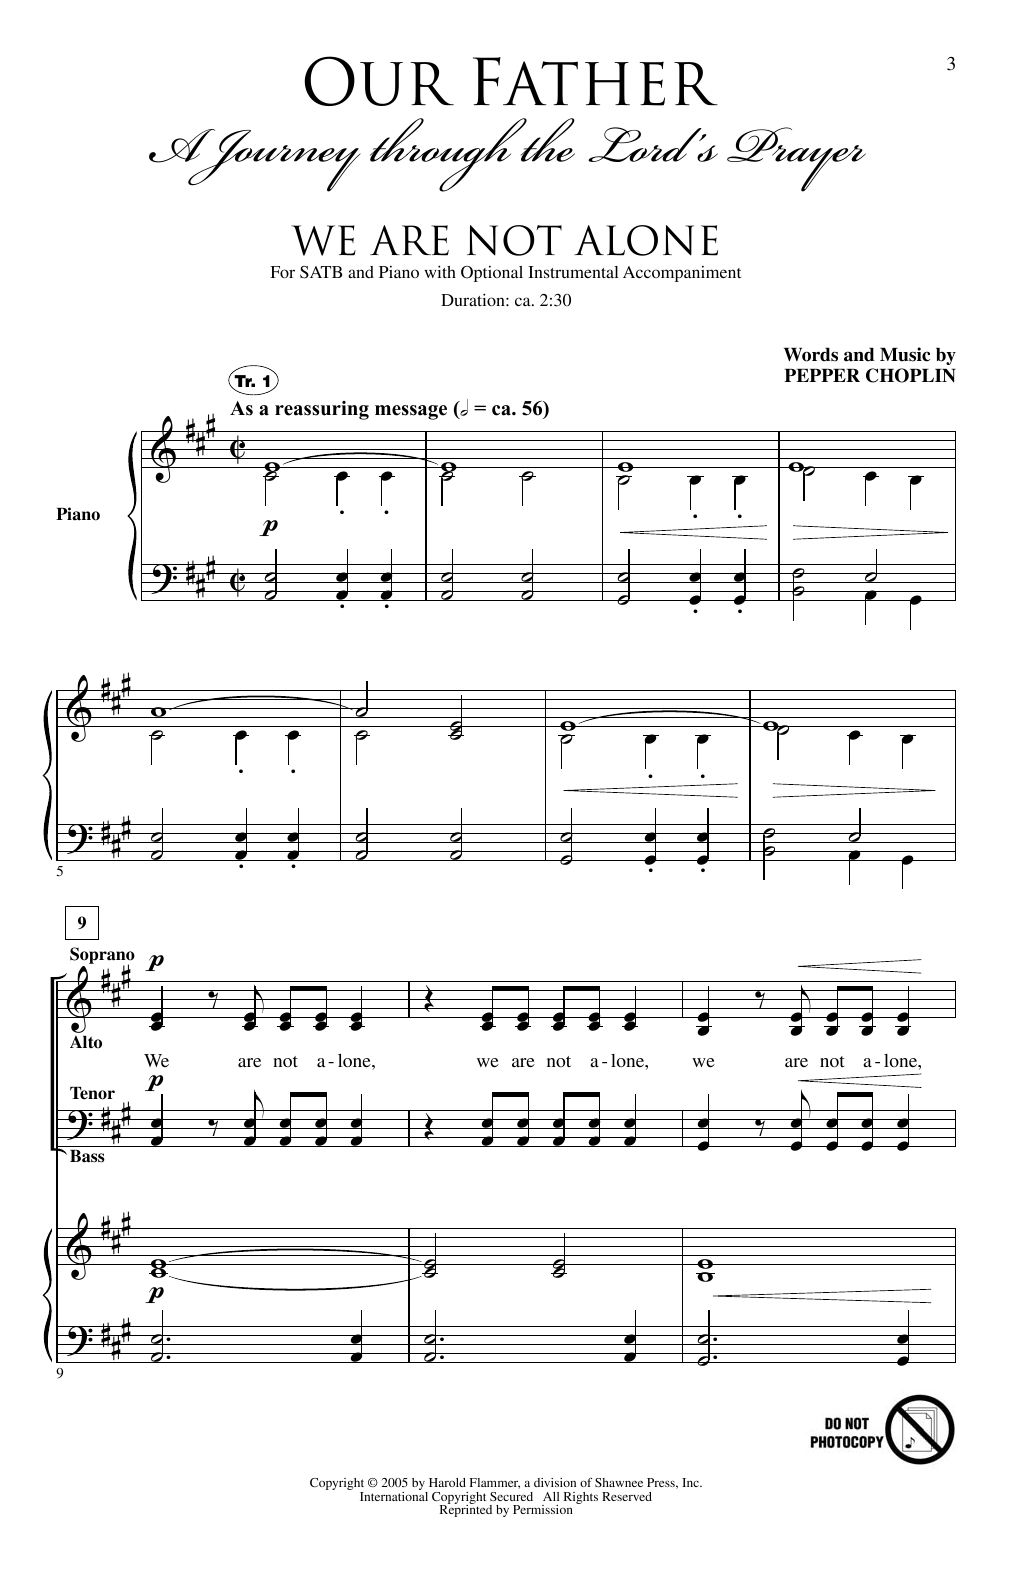 Download Pepper Choplin We Are Not Alone Sheet Music